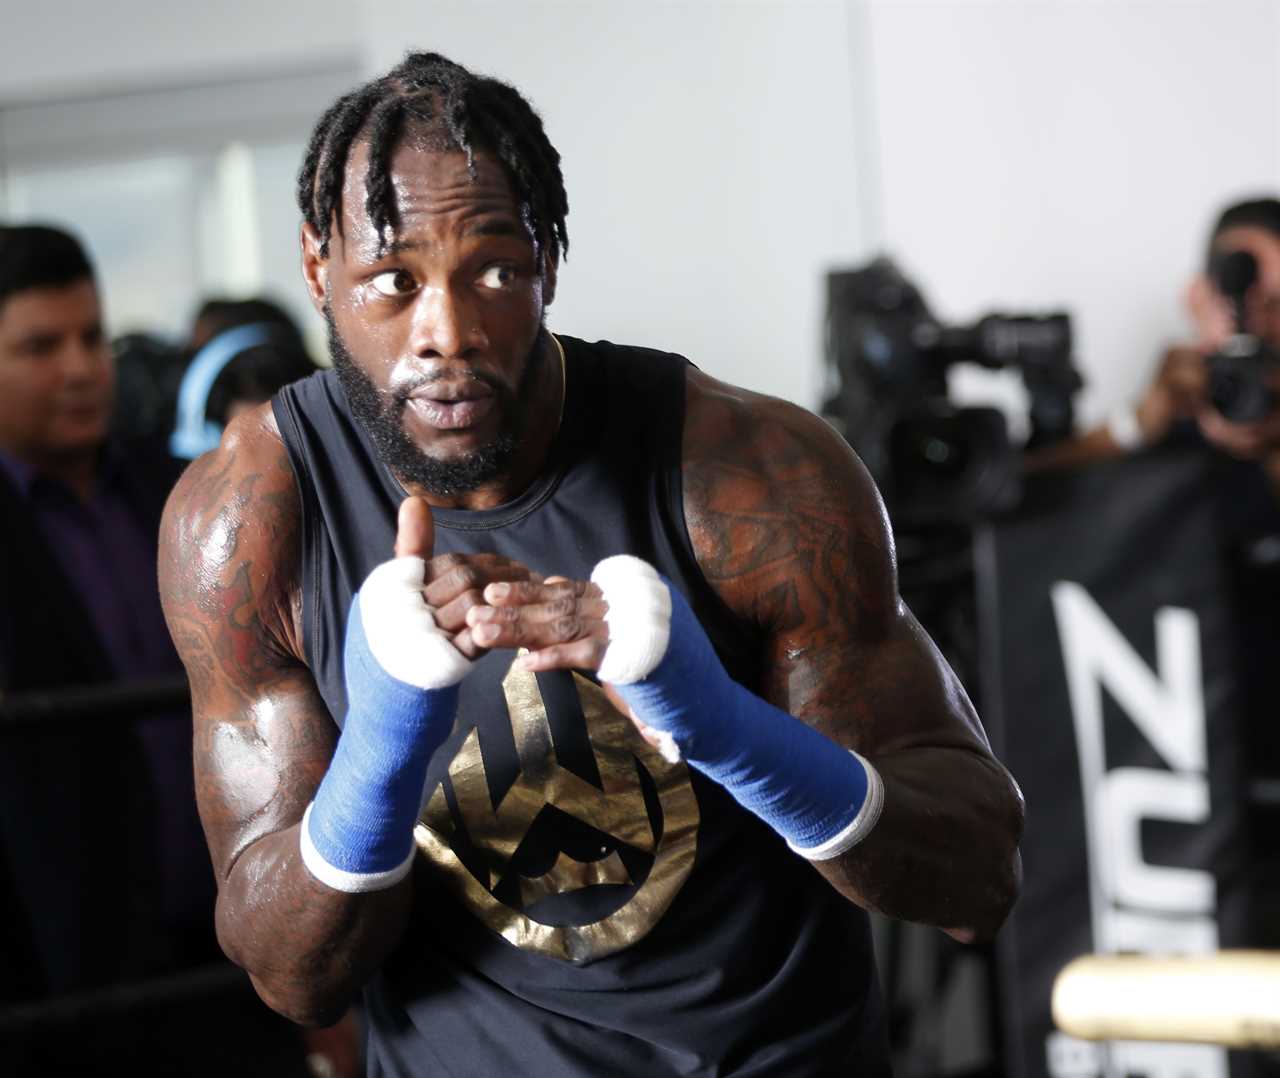 Deontay Wester discussed the mega-fight with UFC heavyweight champion Francis Ngannou behind closed doors